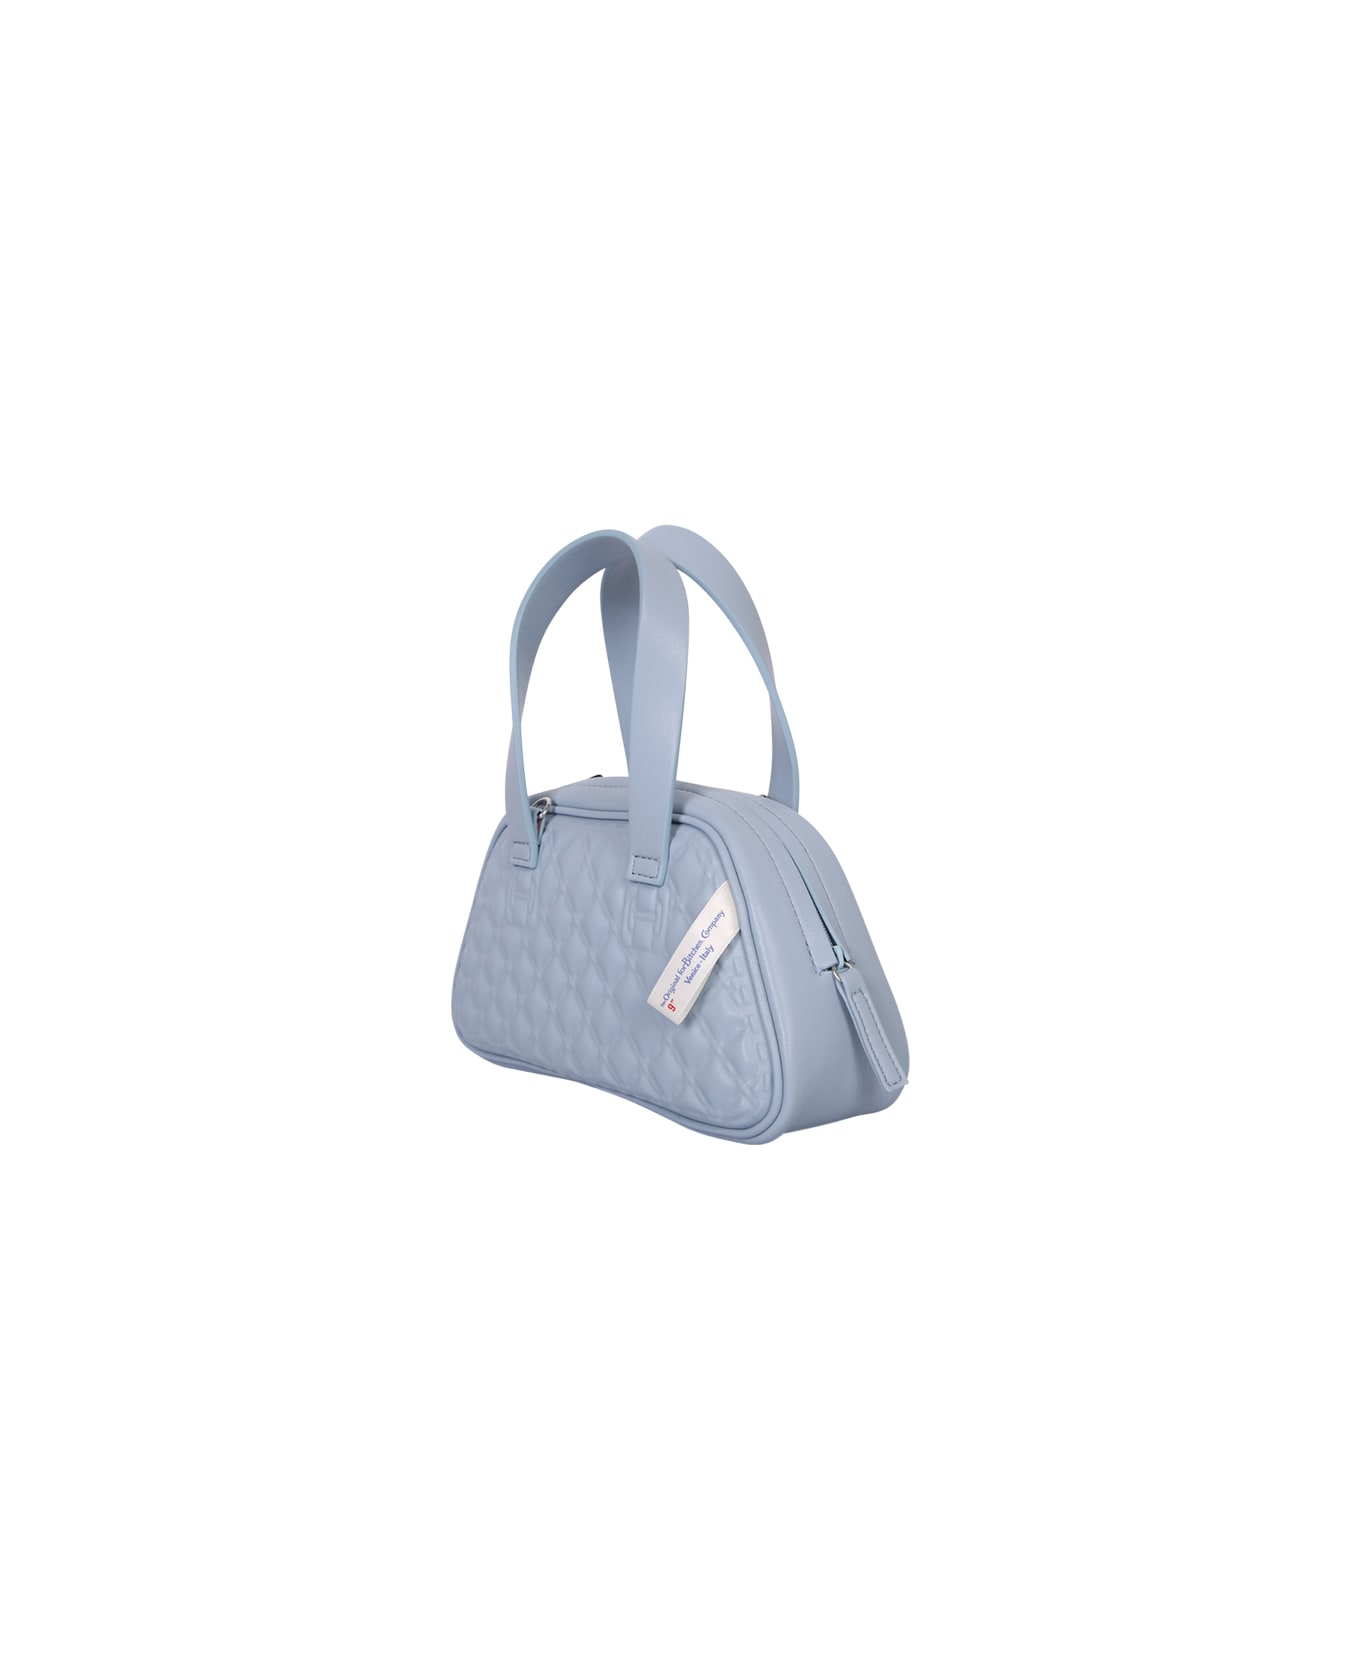 Forbitches Cuddle 9'' Bag - Blue トートバッグ